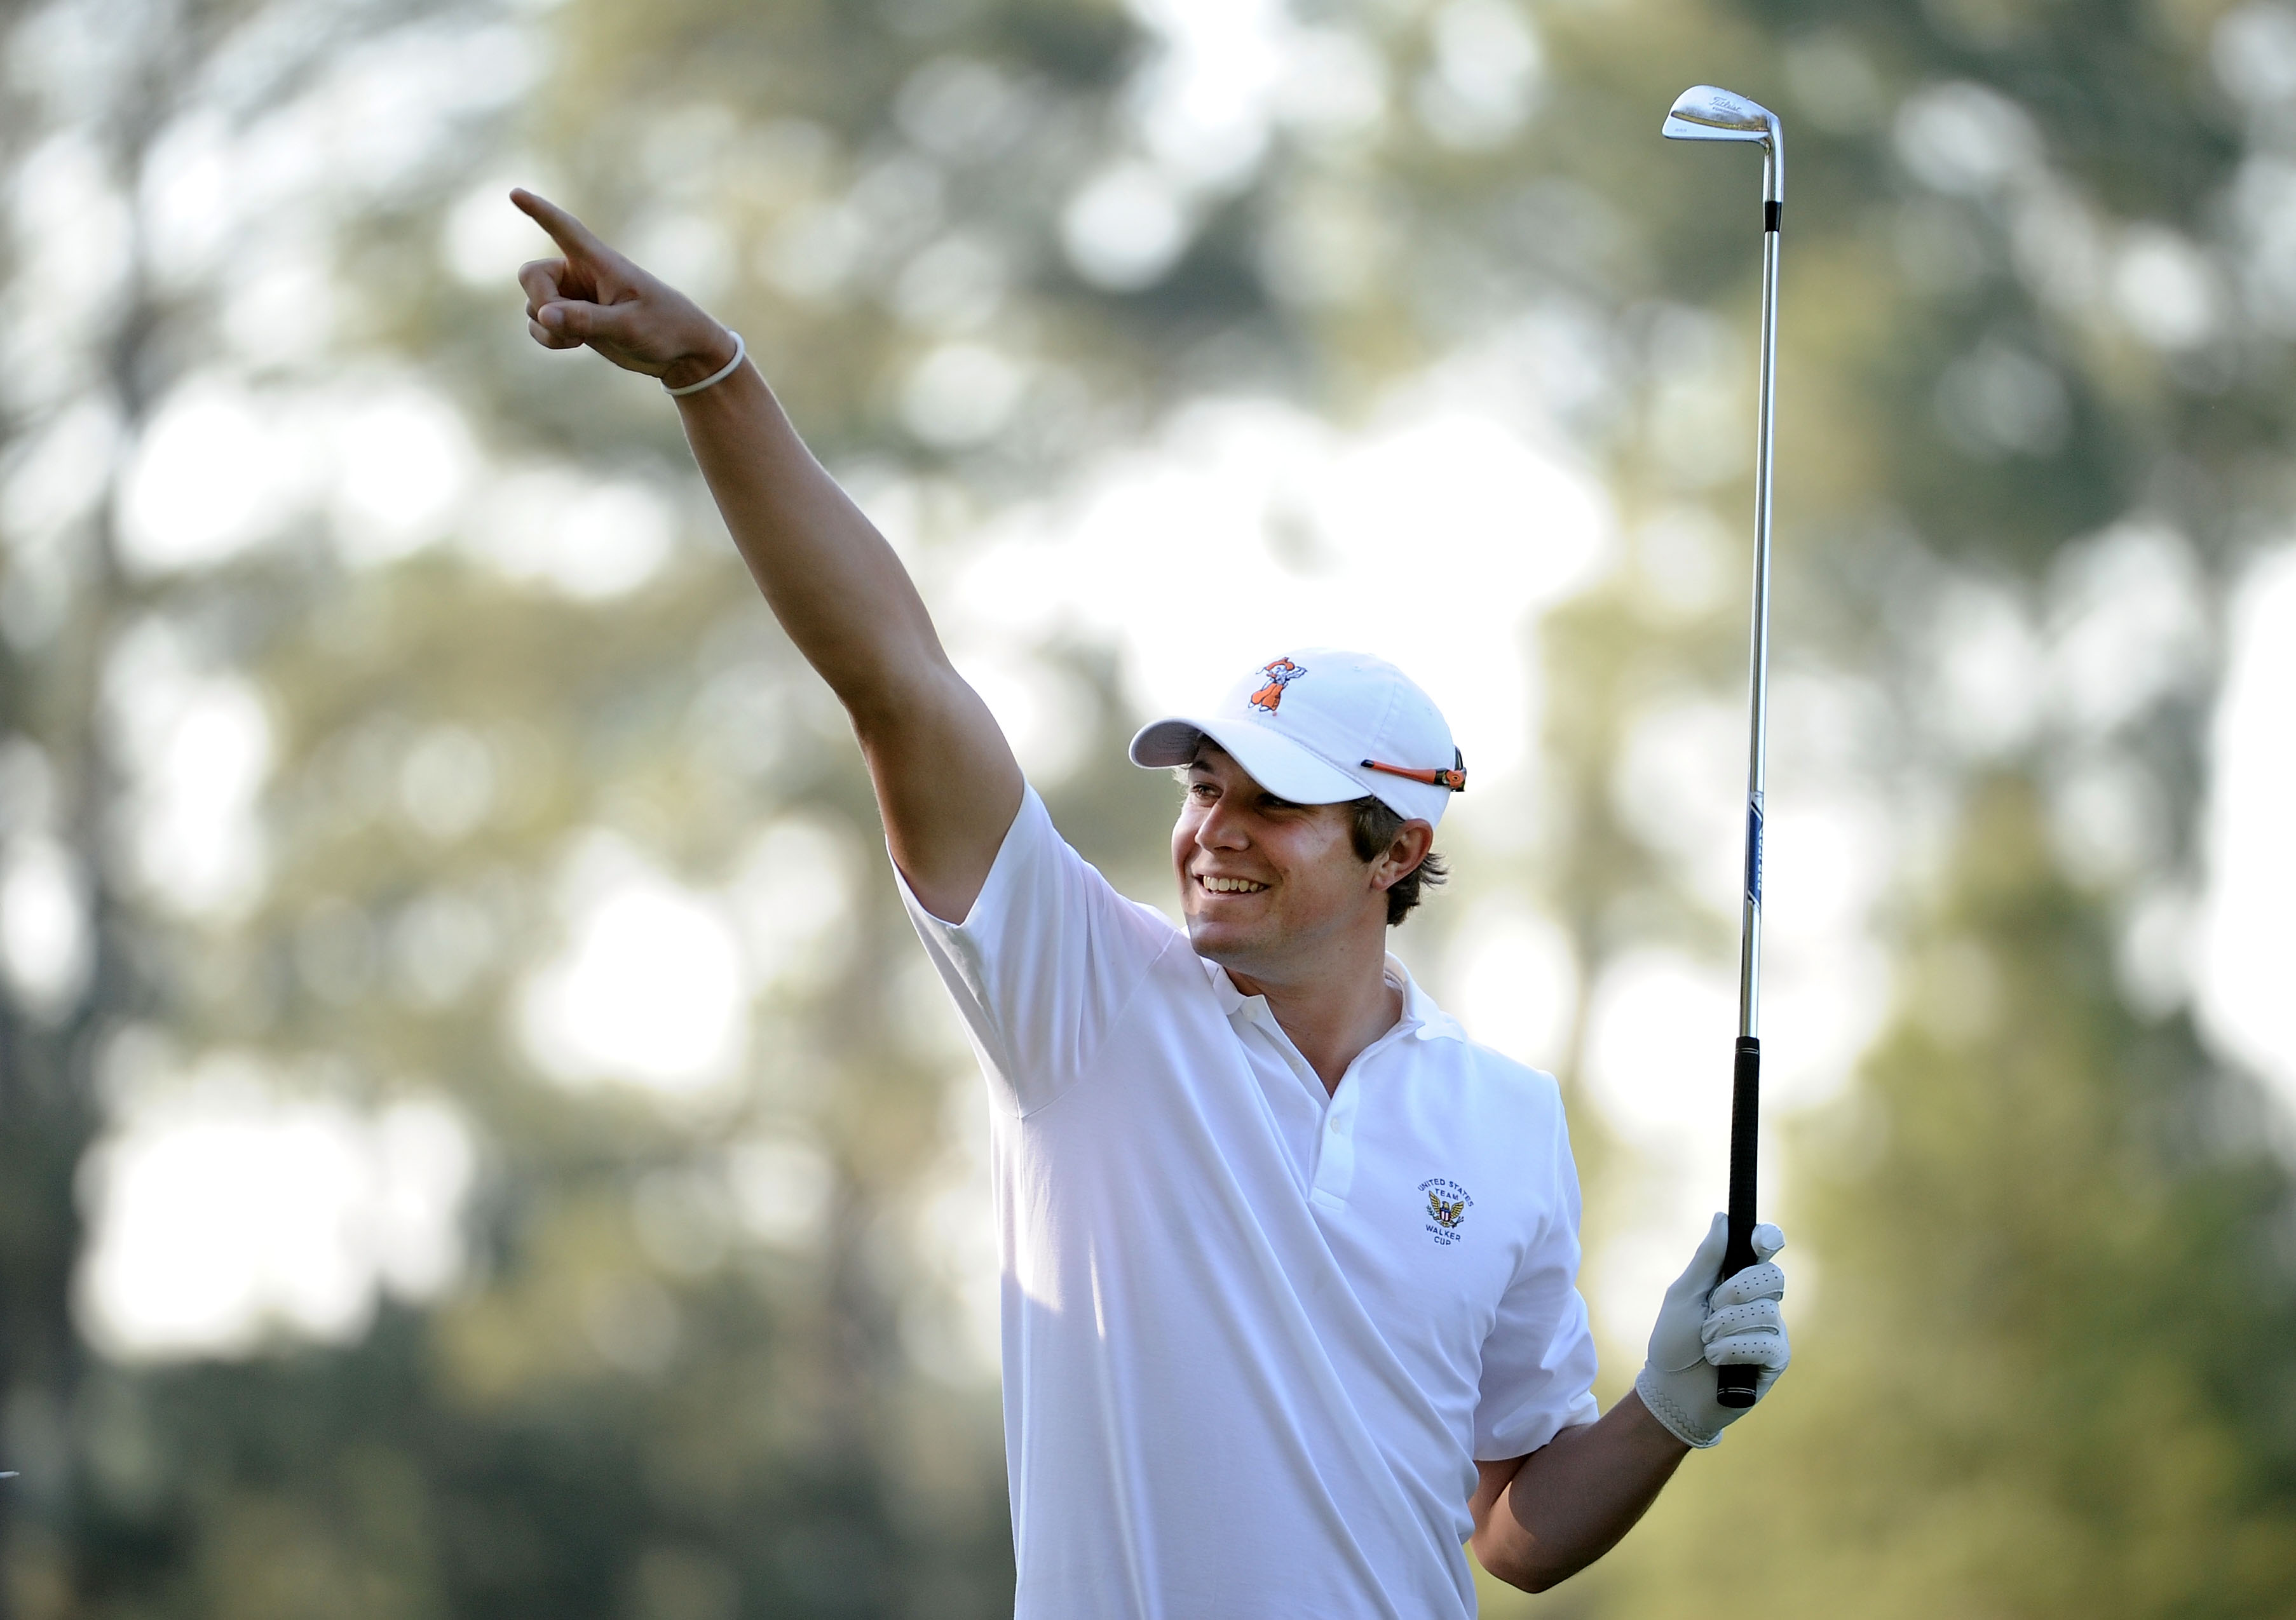 AUGUSTA, GA - APRIL 04:  Amateur Peter Uihlein waits on a tee box during a practice round prior to the 2011 Masters Tournament at Augusta National Golf Club on April 4, 2011 in Augusta, Georgia.  (Photo by Harry How/Getty Images)